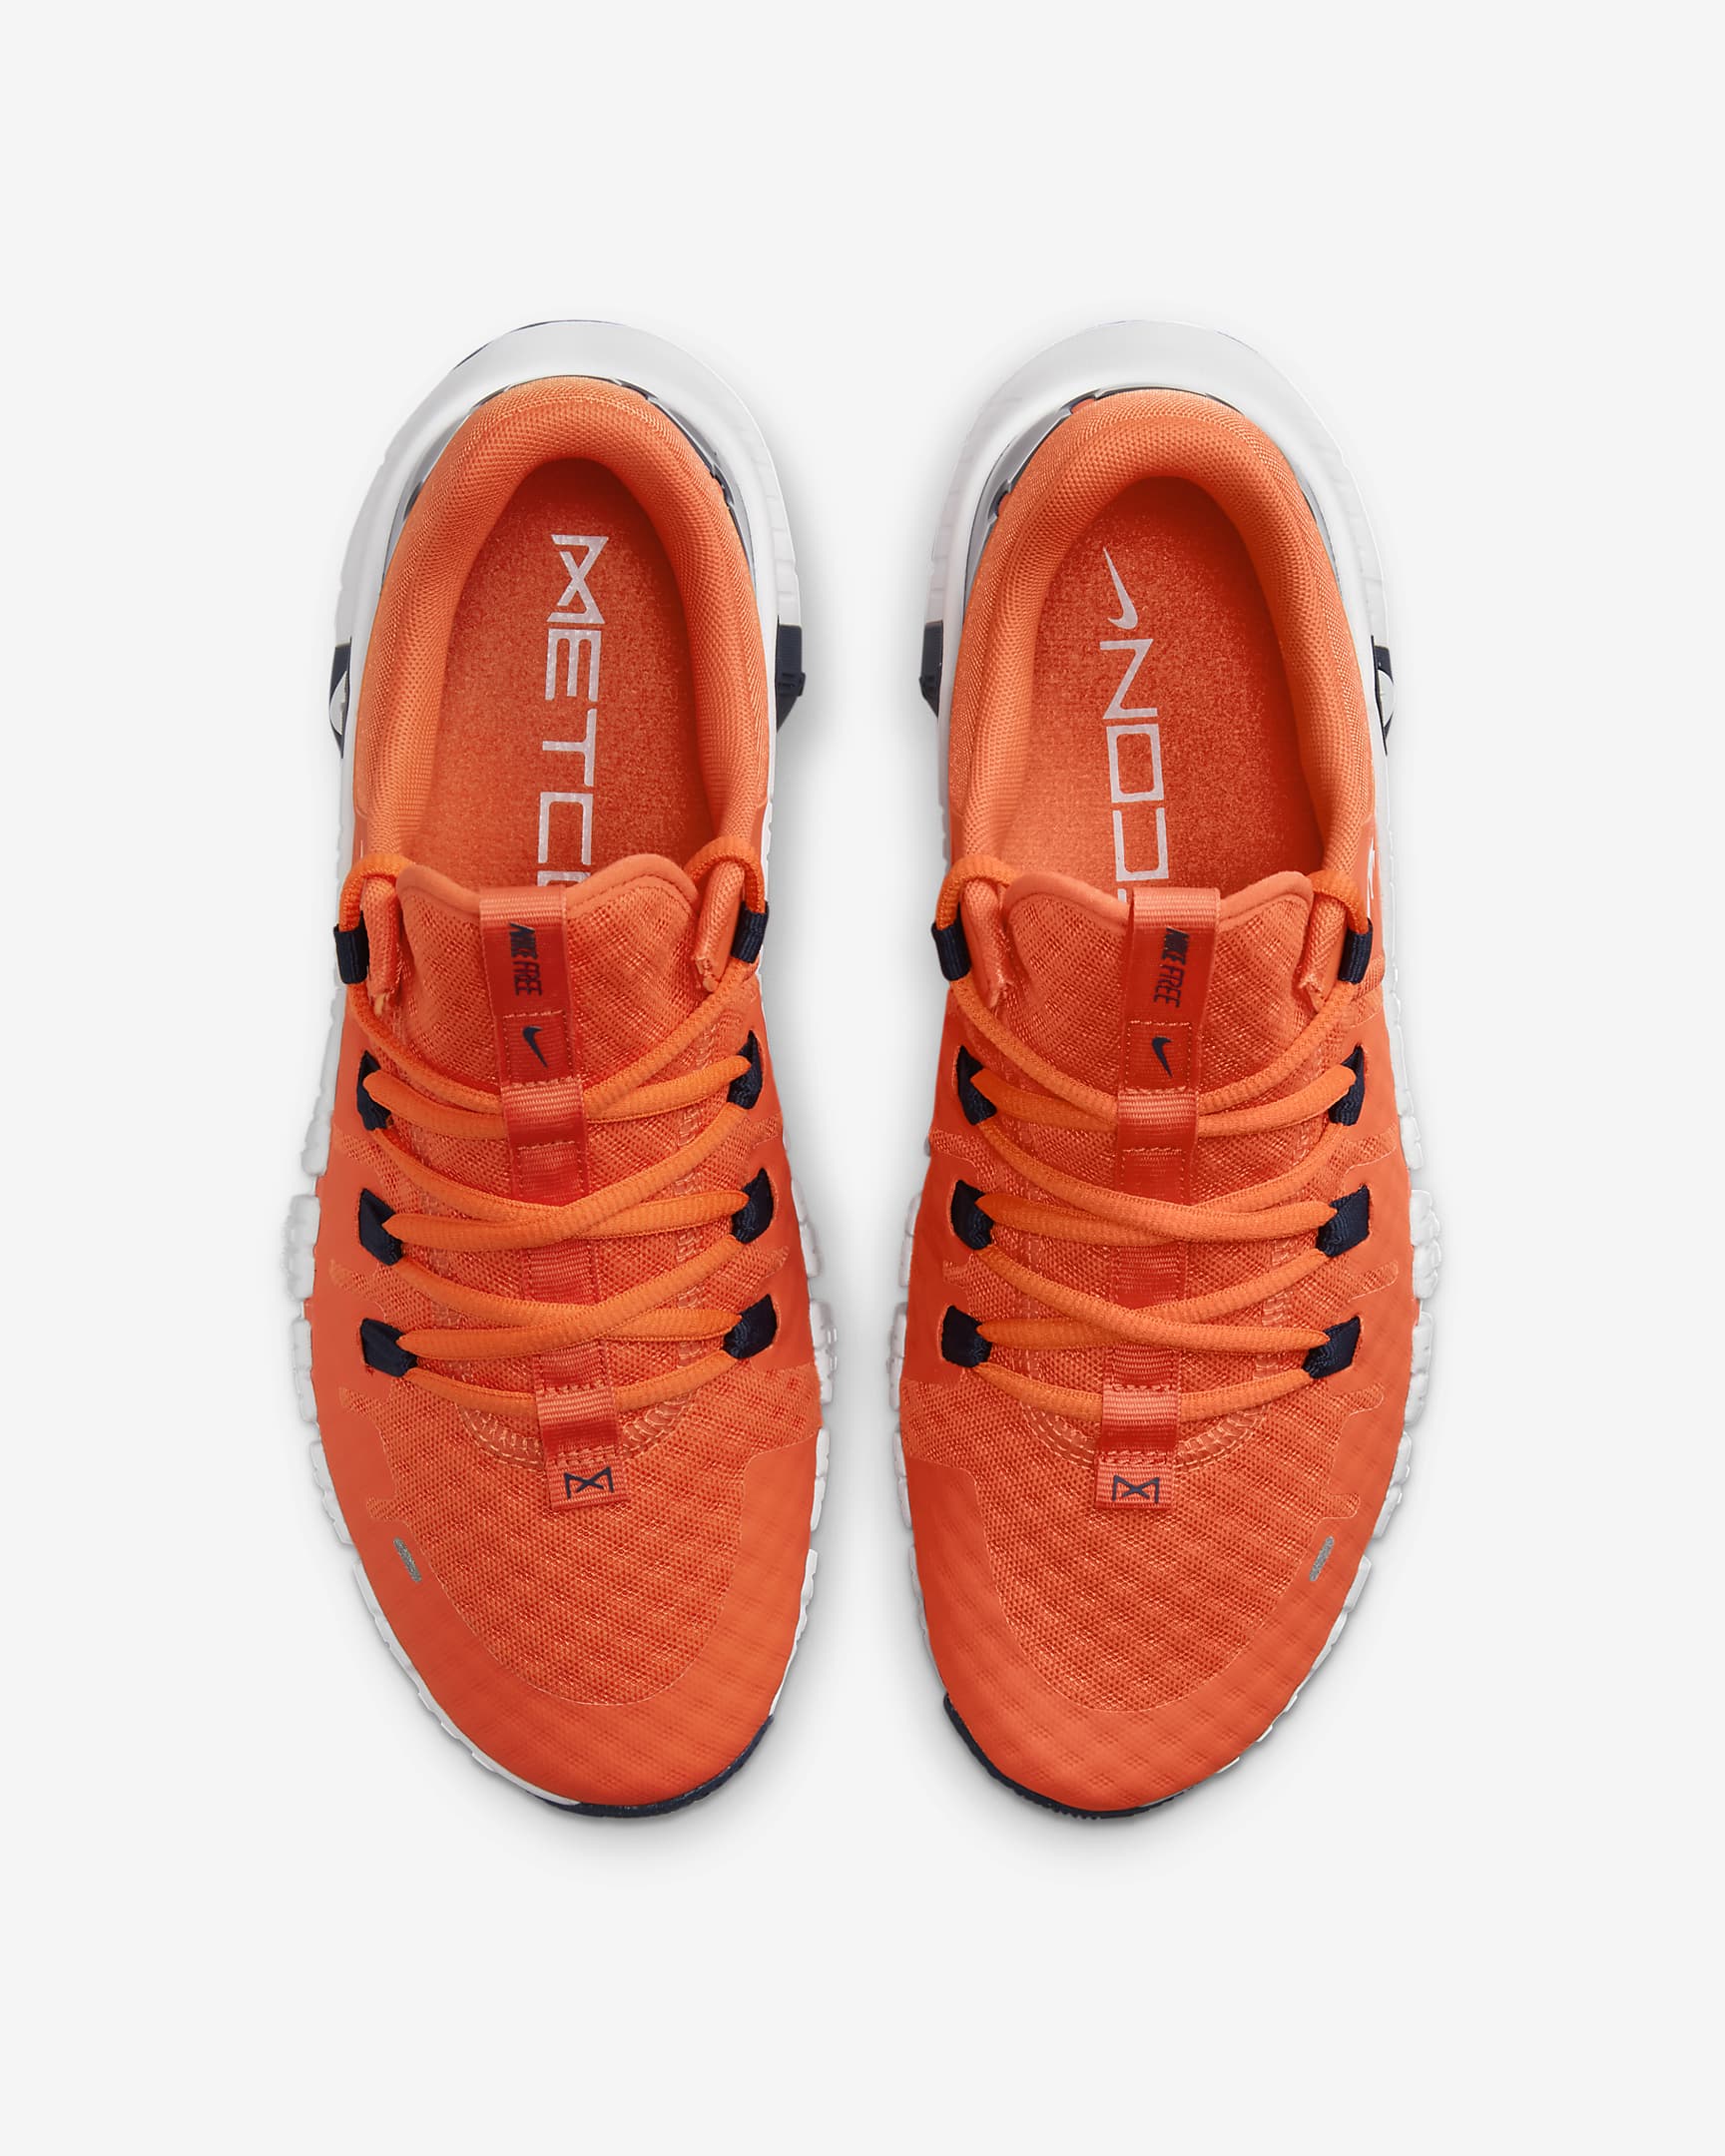 Nike Free Metcon 5 Men’s Shoes Review: This Shoe Will Dominate the Gym!